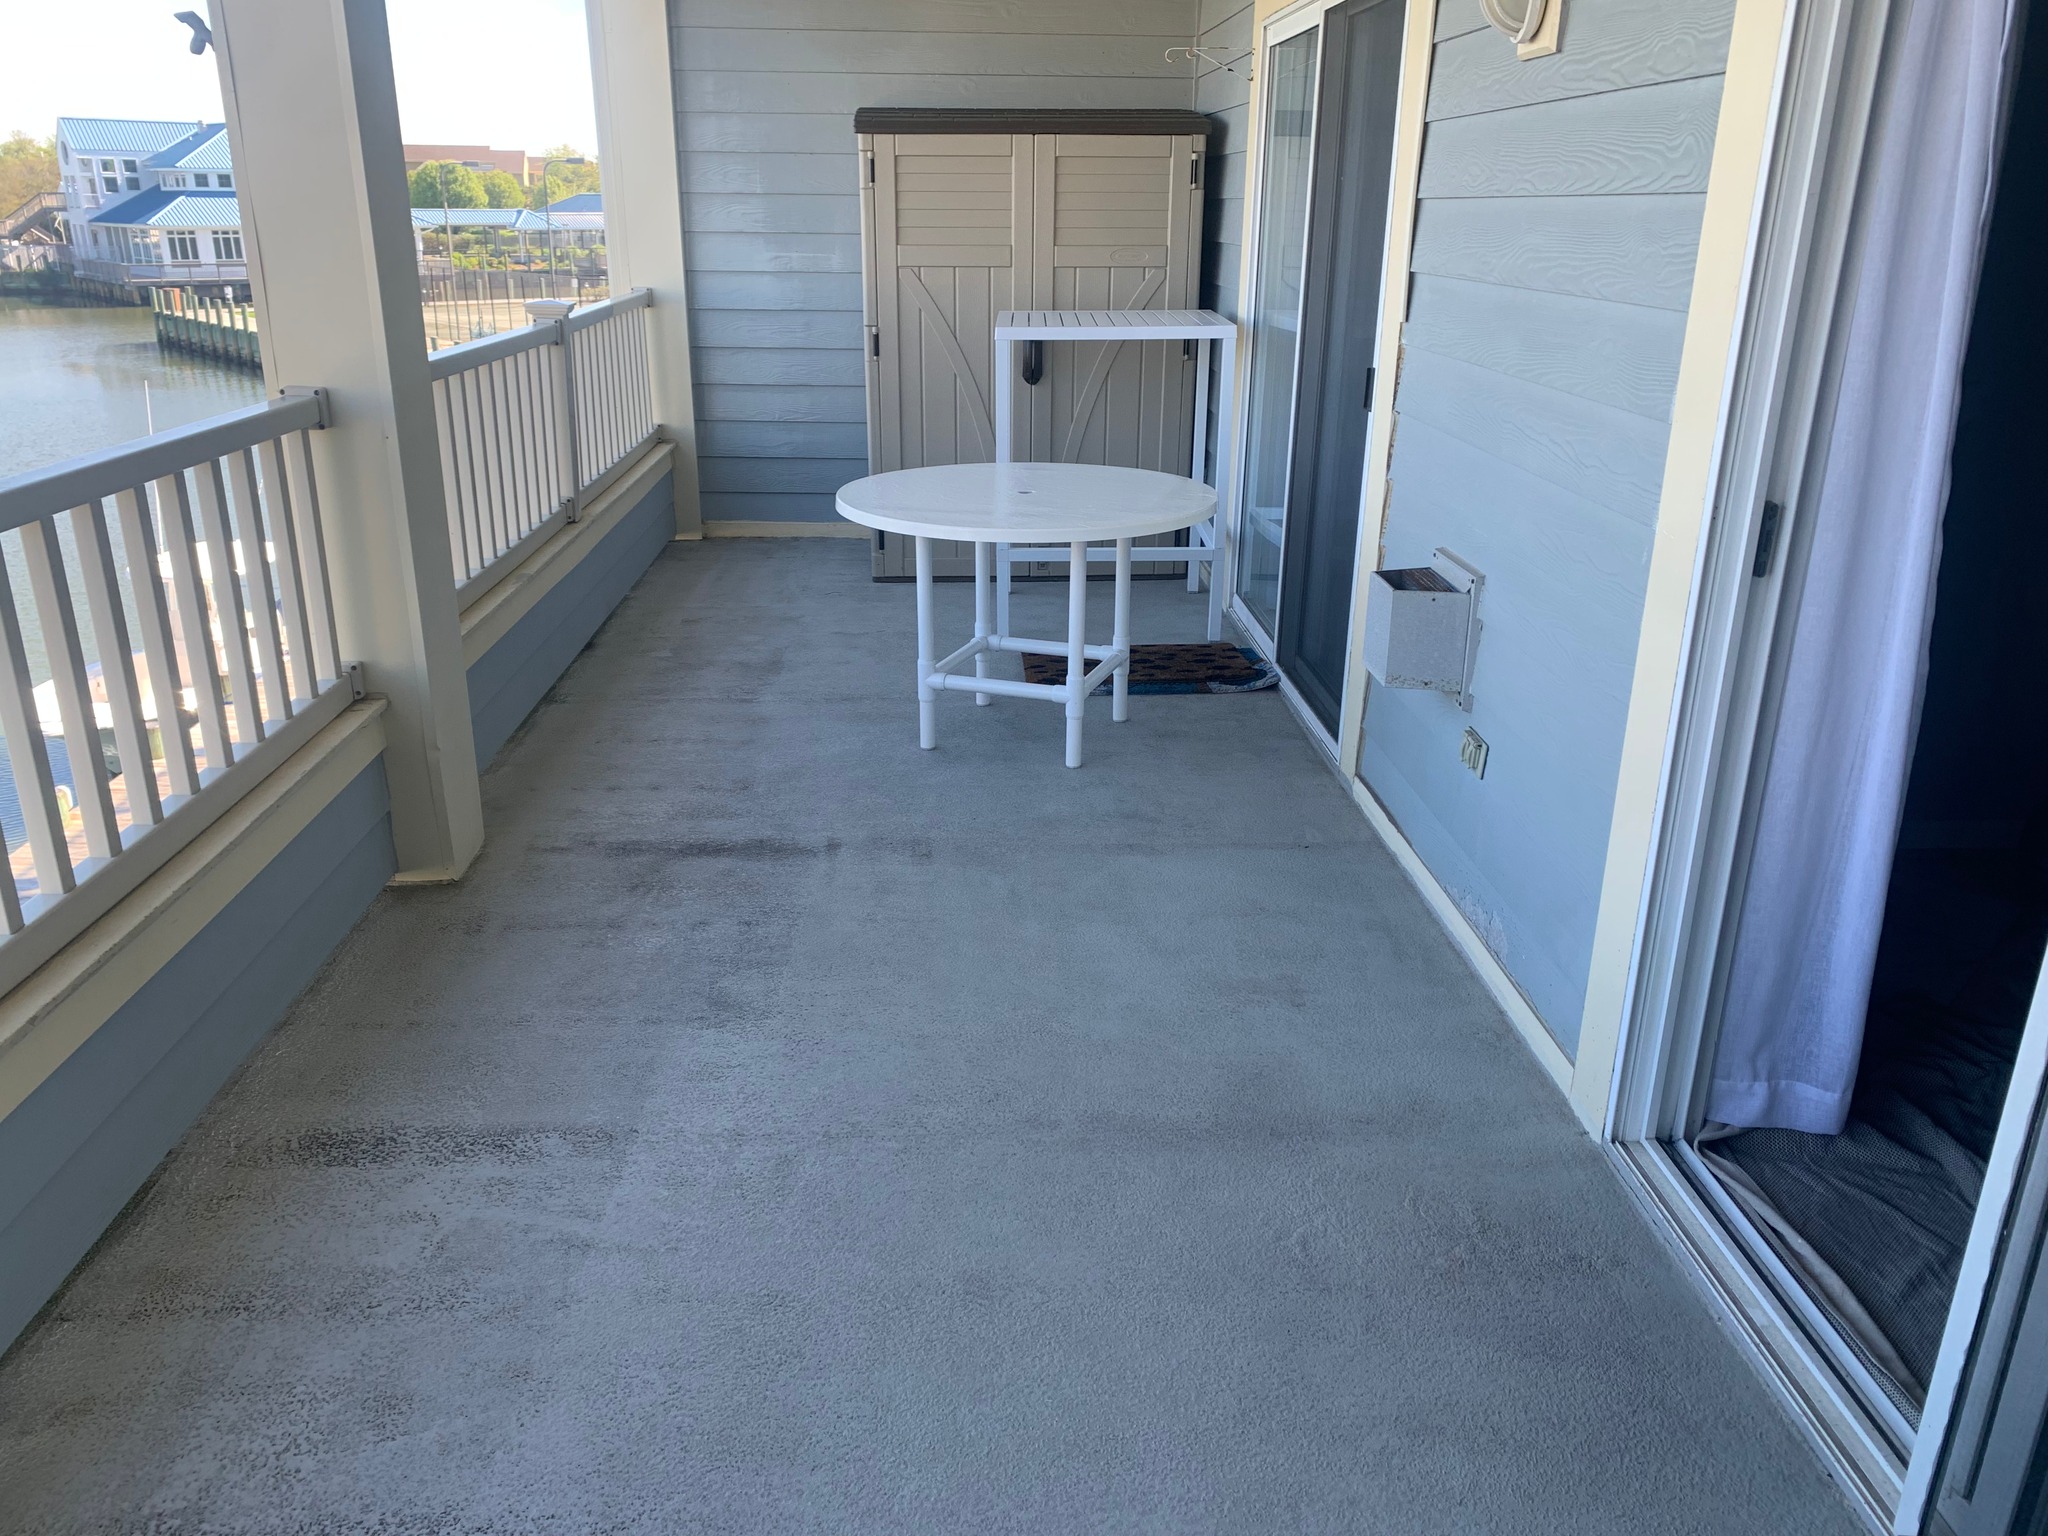 Showcase Weatherstone Composite Deck Tiles Coverdeck Systems